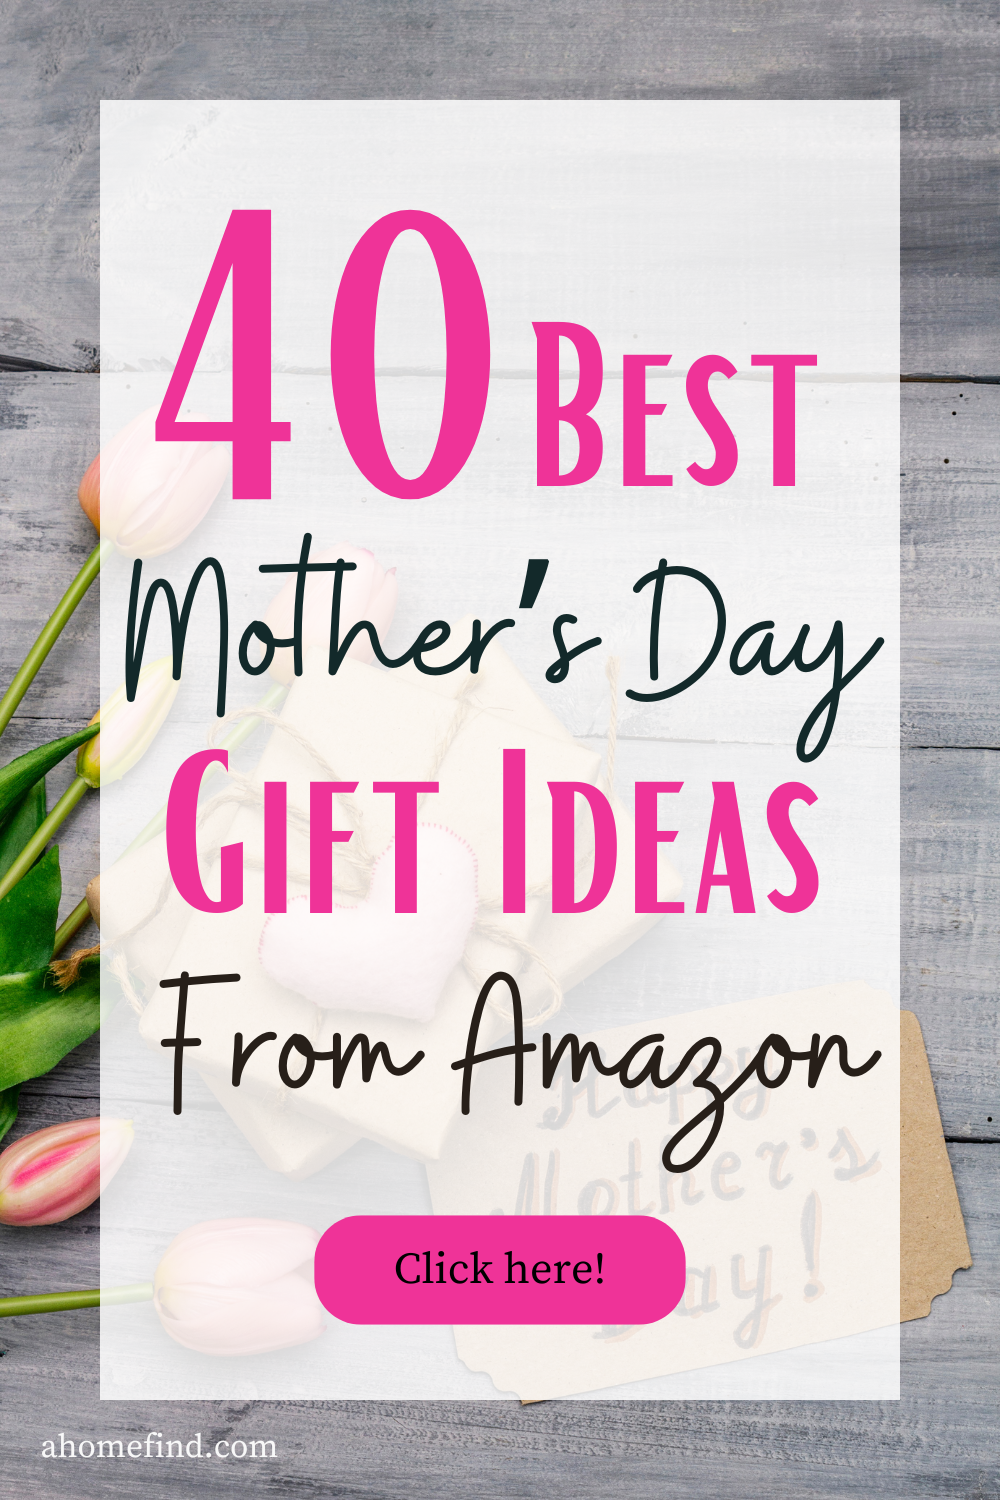 40 best mother's day gift ideas.